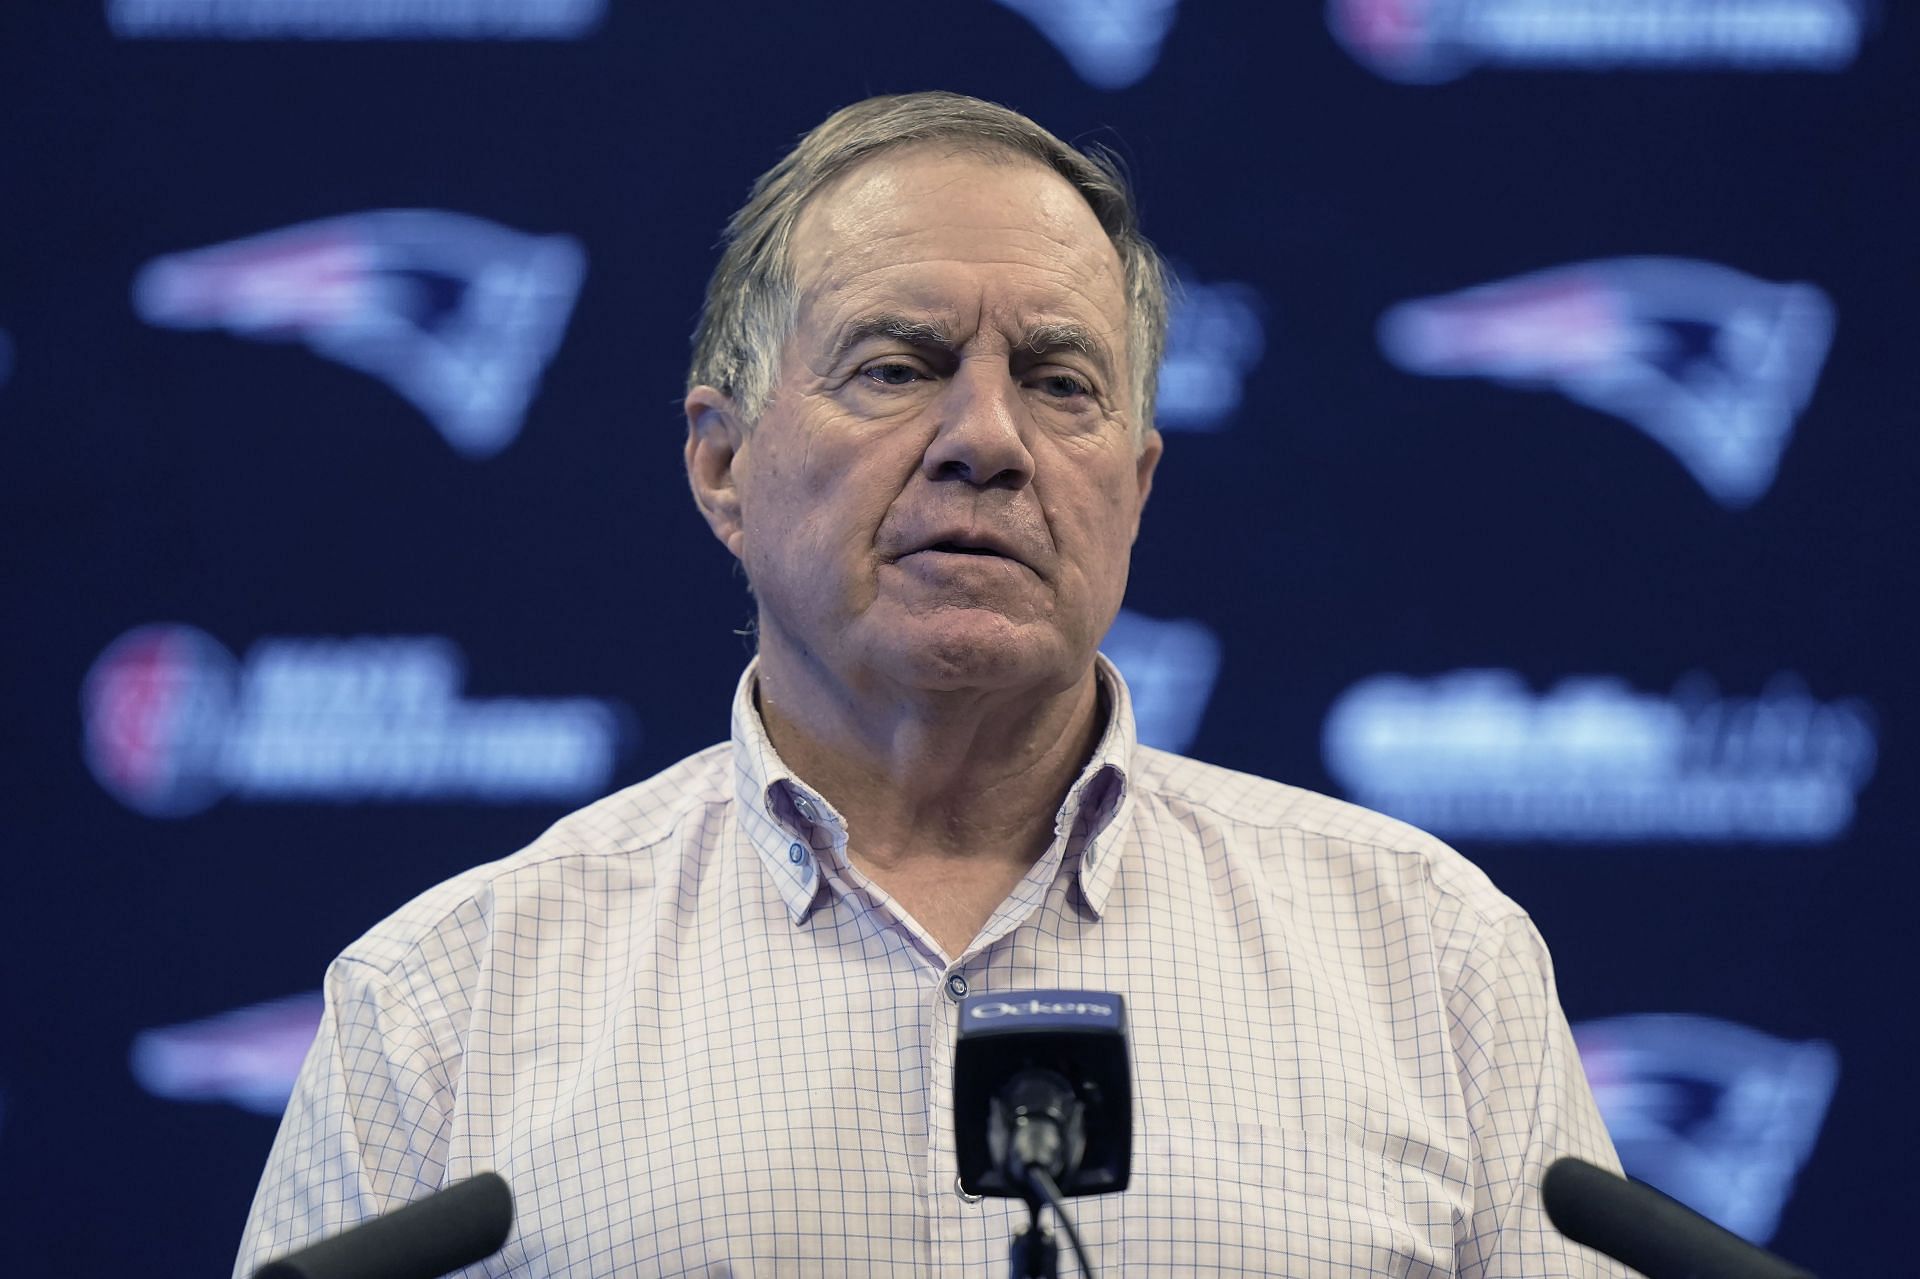 Patriots HC Bill Belichick on his way out?